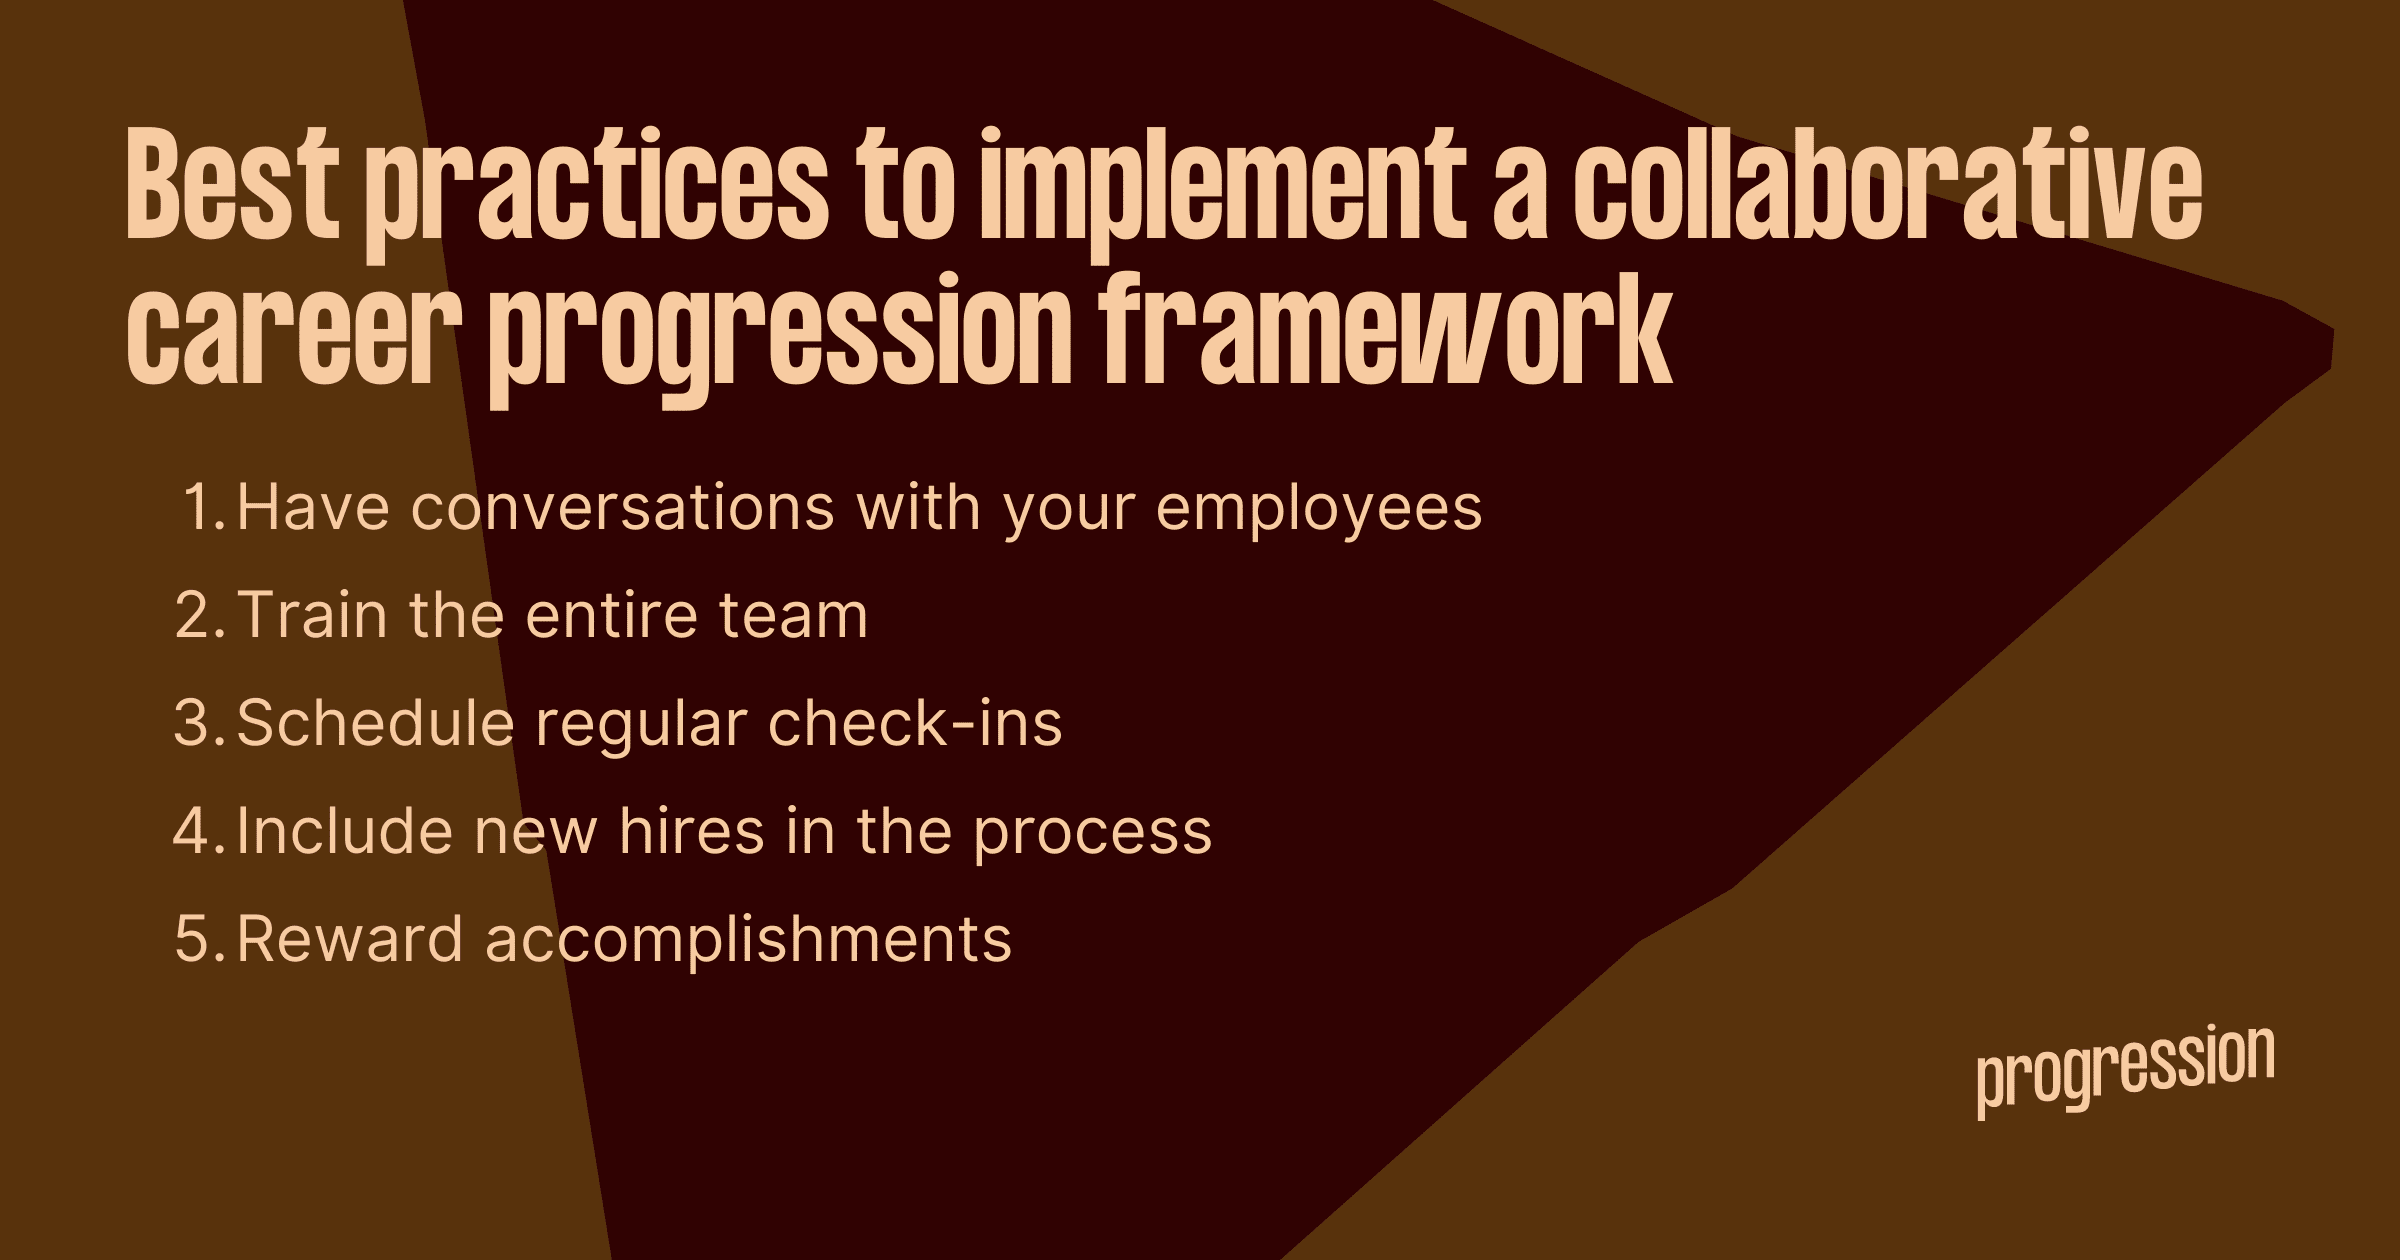 Graphic showing best practices for implementing collaborative career frameworks